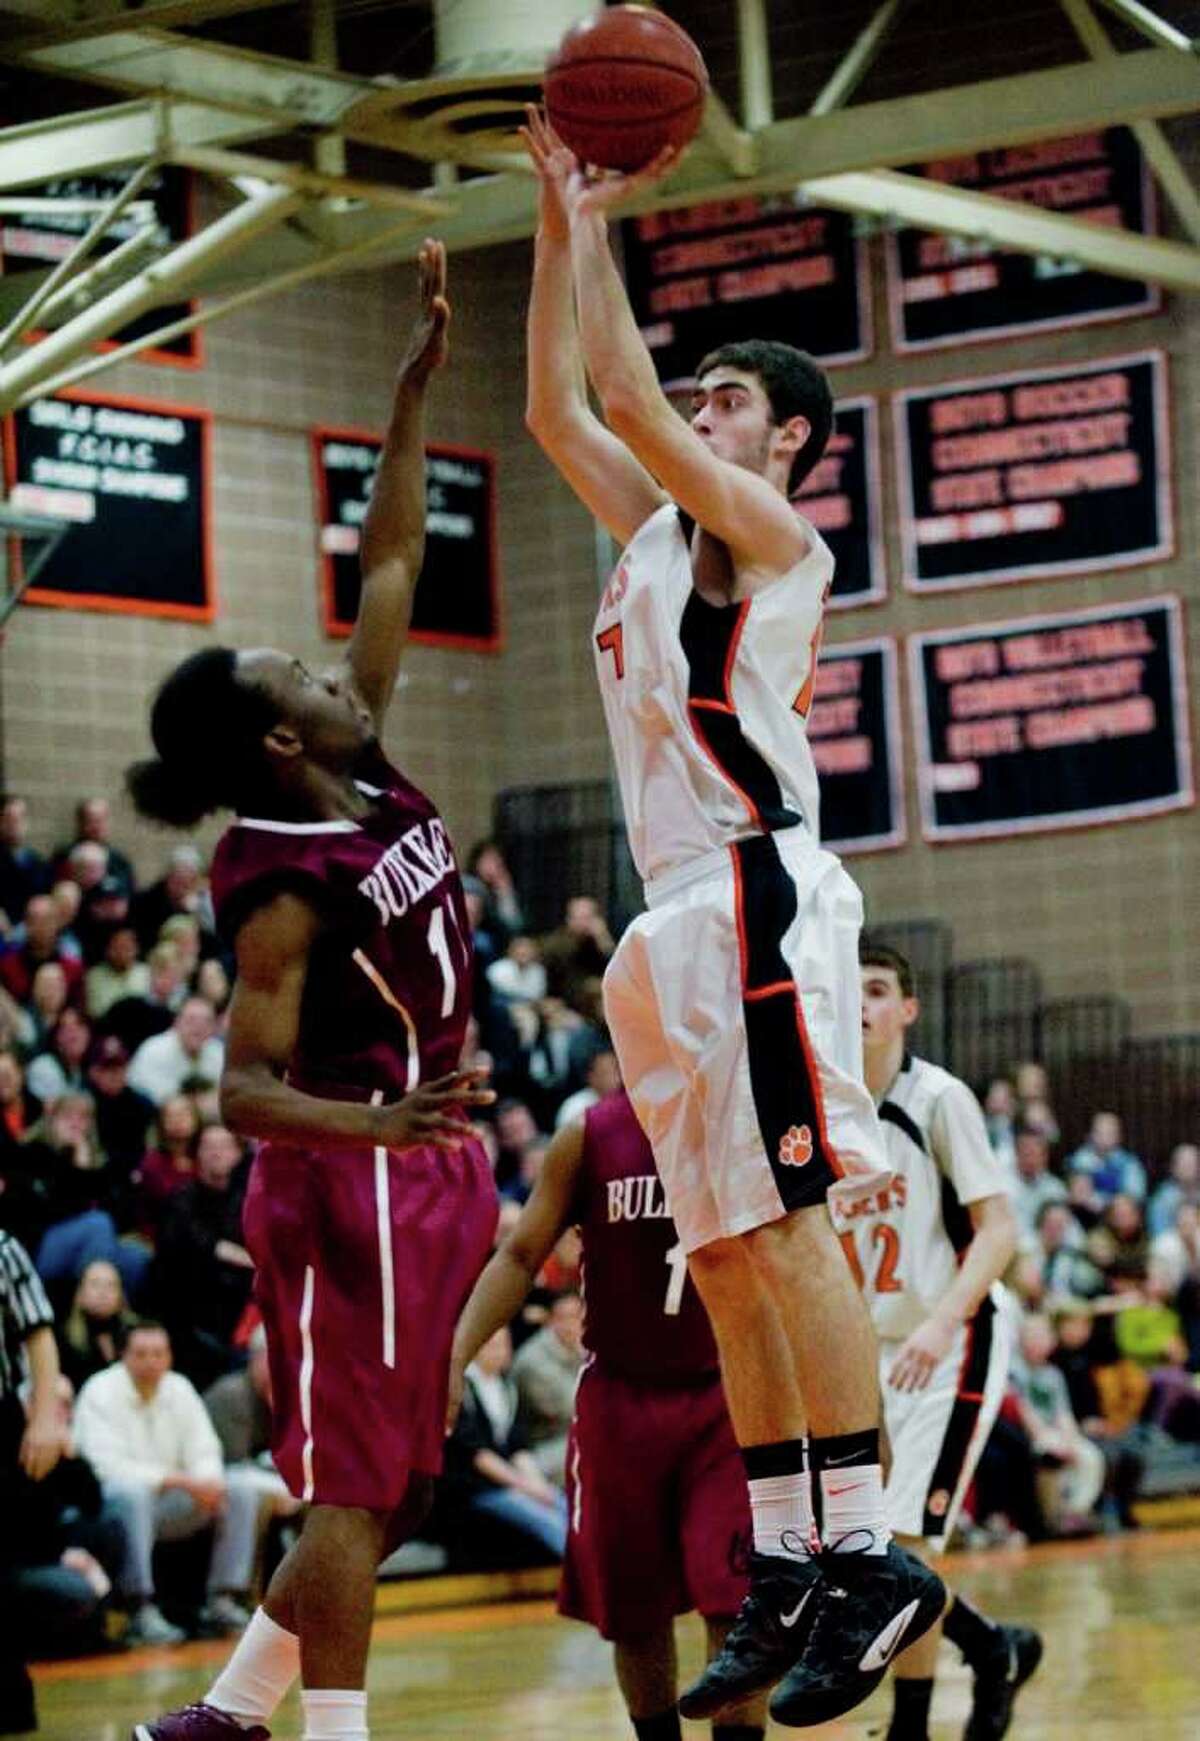 Ridgefield High School's John Heller takes a shot against Bulkeley High School in a game played at Ridgefield. Tuesday, Mar. 6, 2012